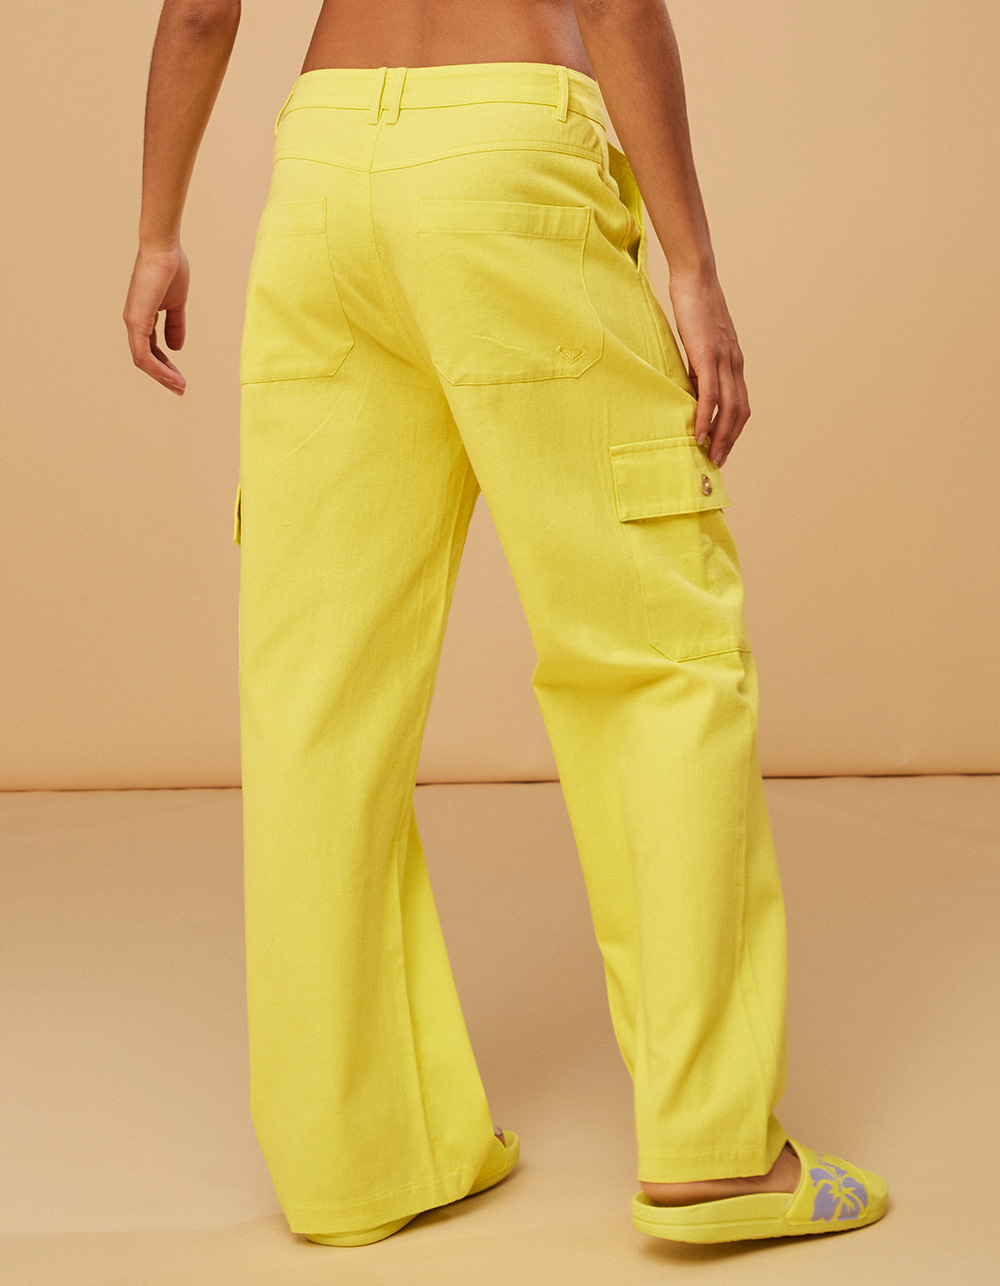 ROXY x Kate Bosworth Surf Kind Kate Womens Cargo Pants - YELLOW | Tillys